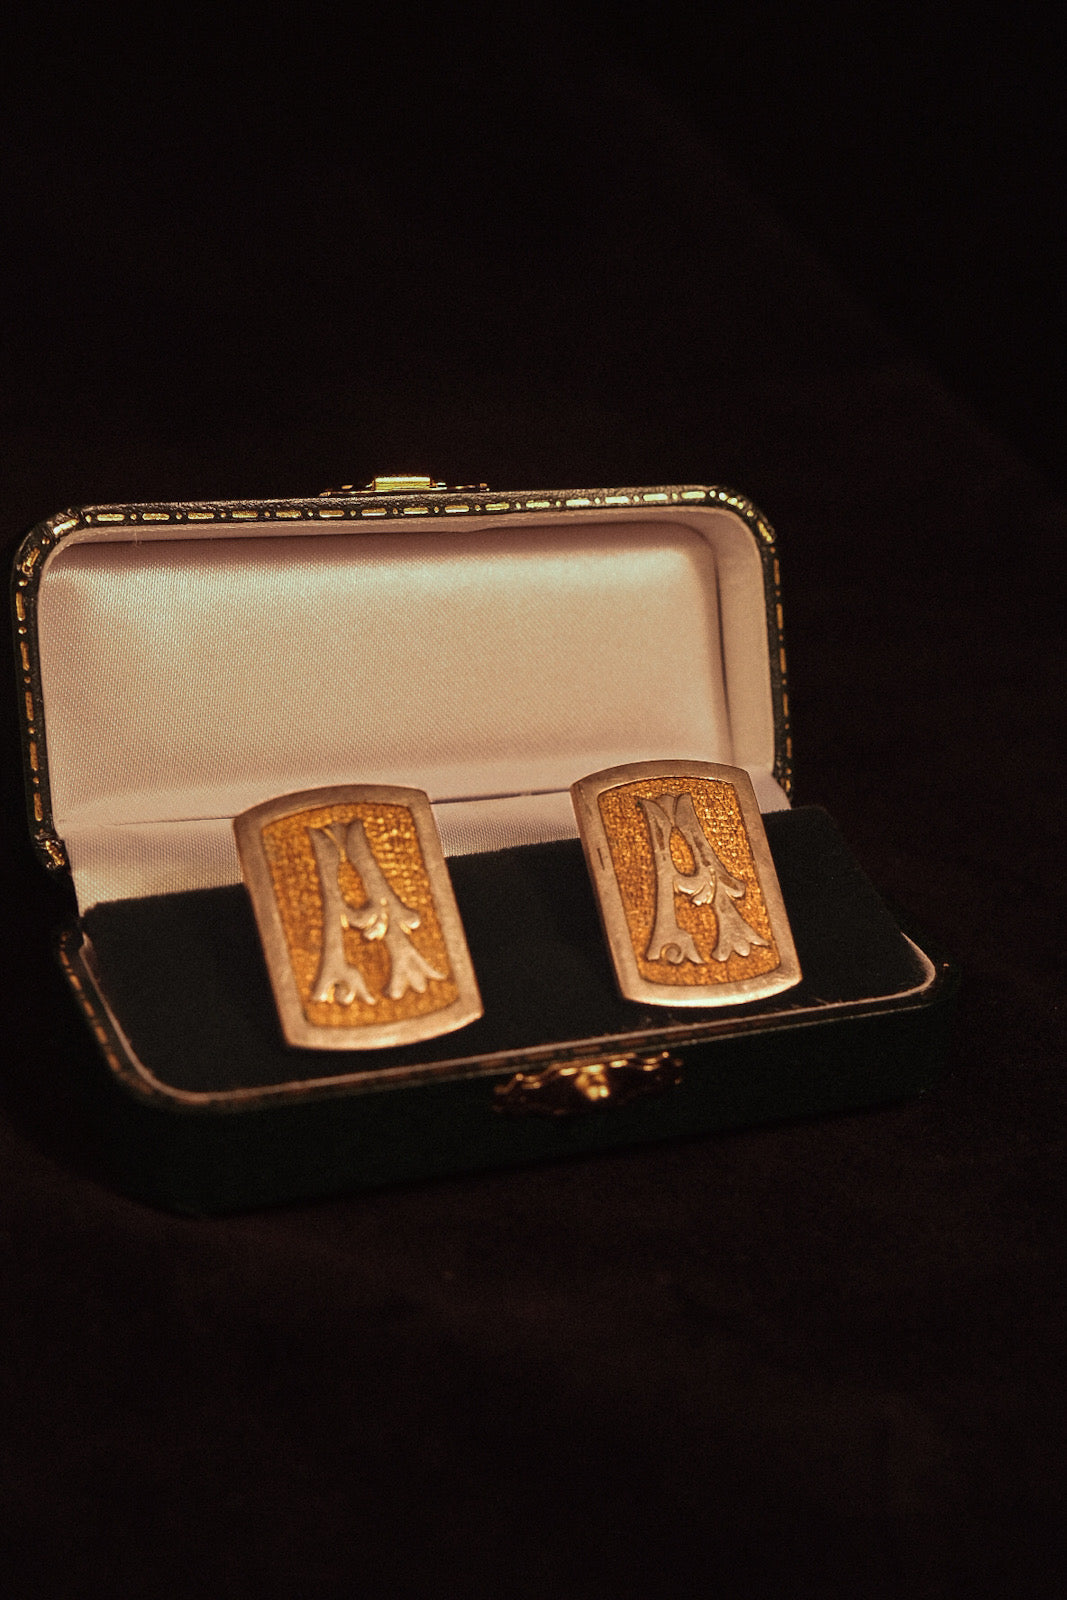 Exceptional ca 1870 Letter "A" Cufflinks